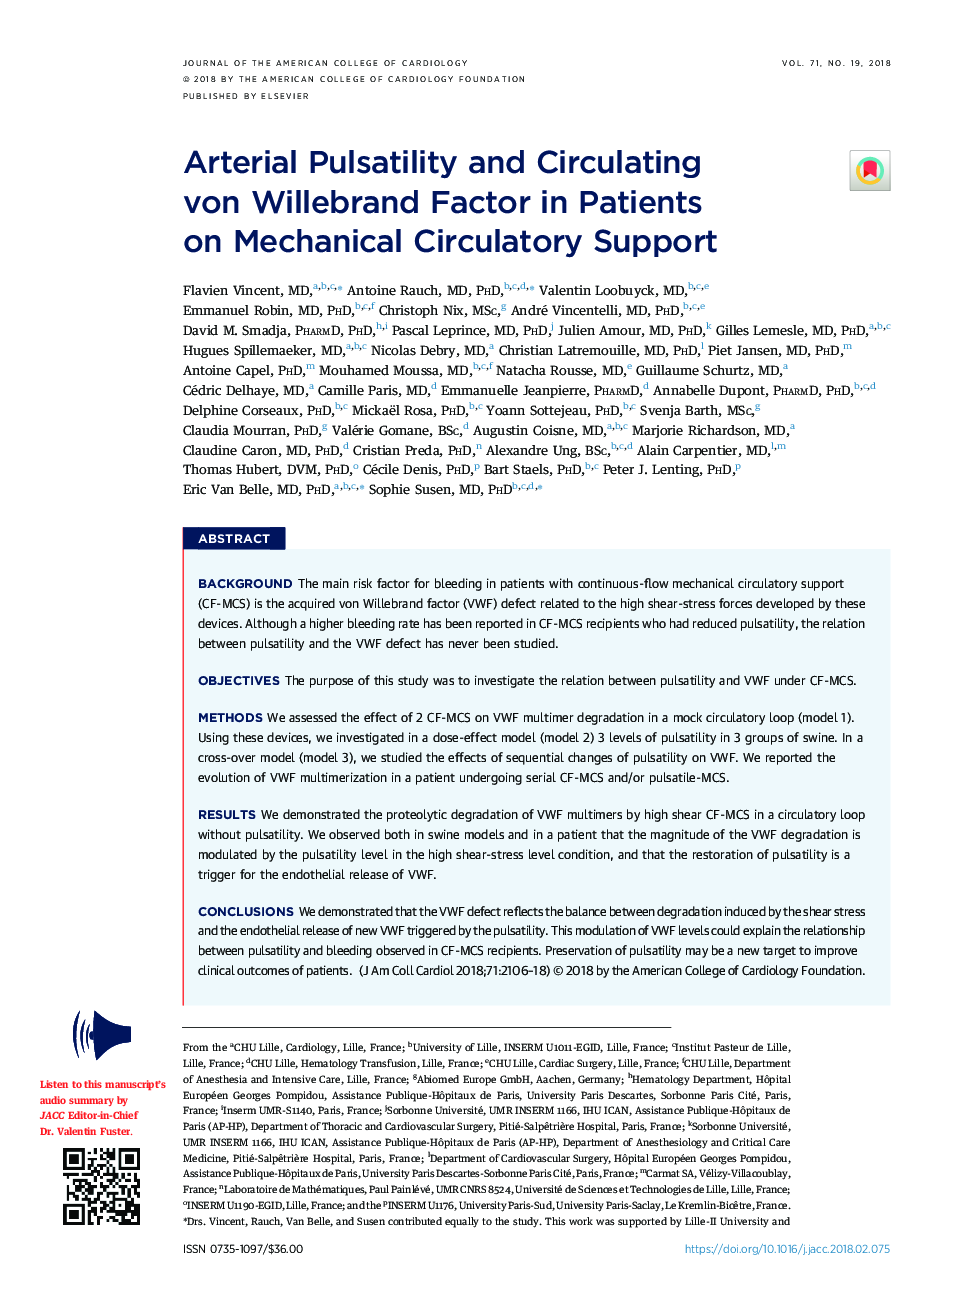 Arterial Pulsatility and Circulating vonÂ Willebrand Factor in Patients onÂ Mechanical CirculatoryÂ Support